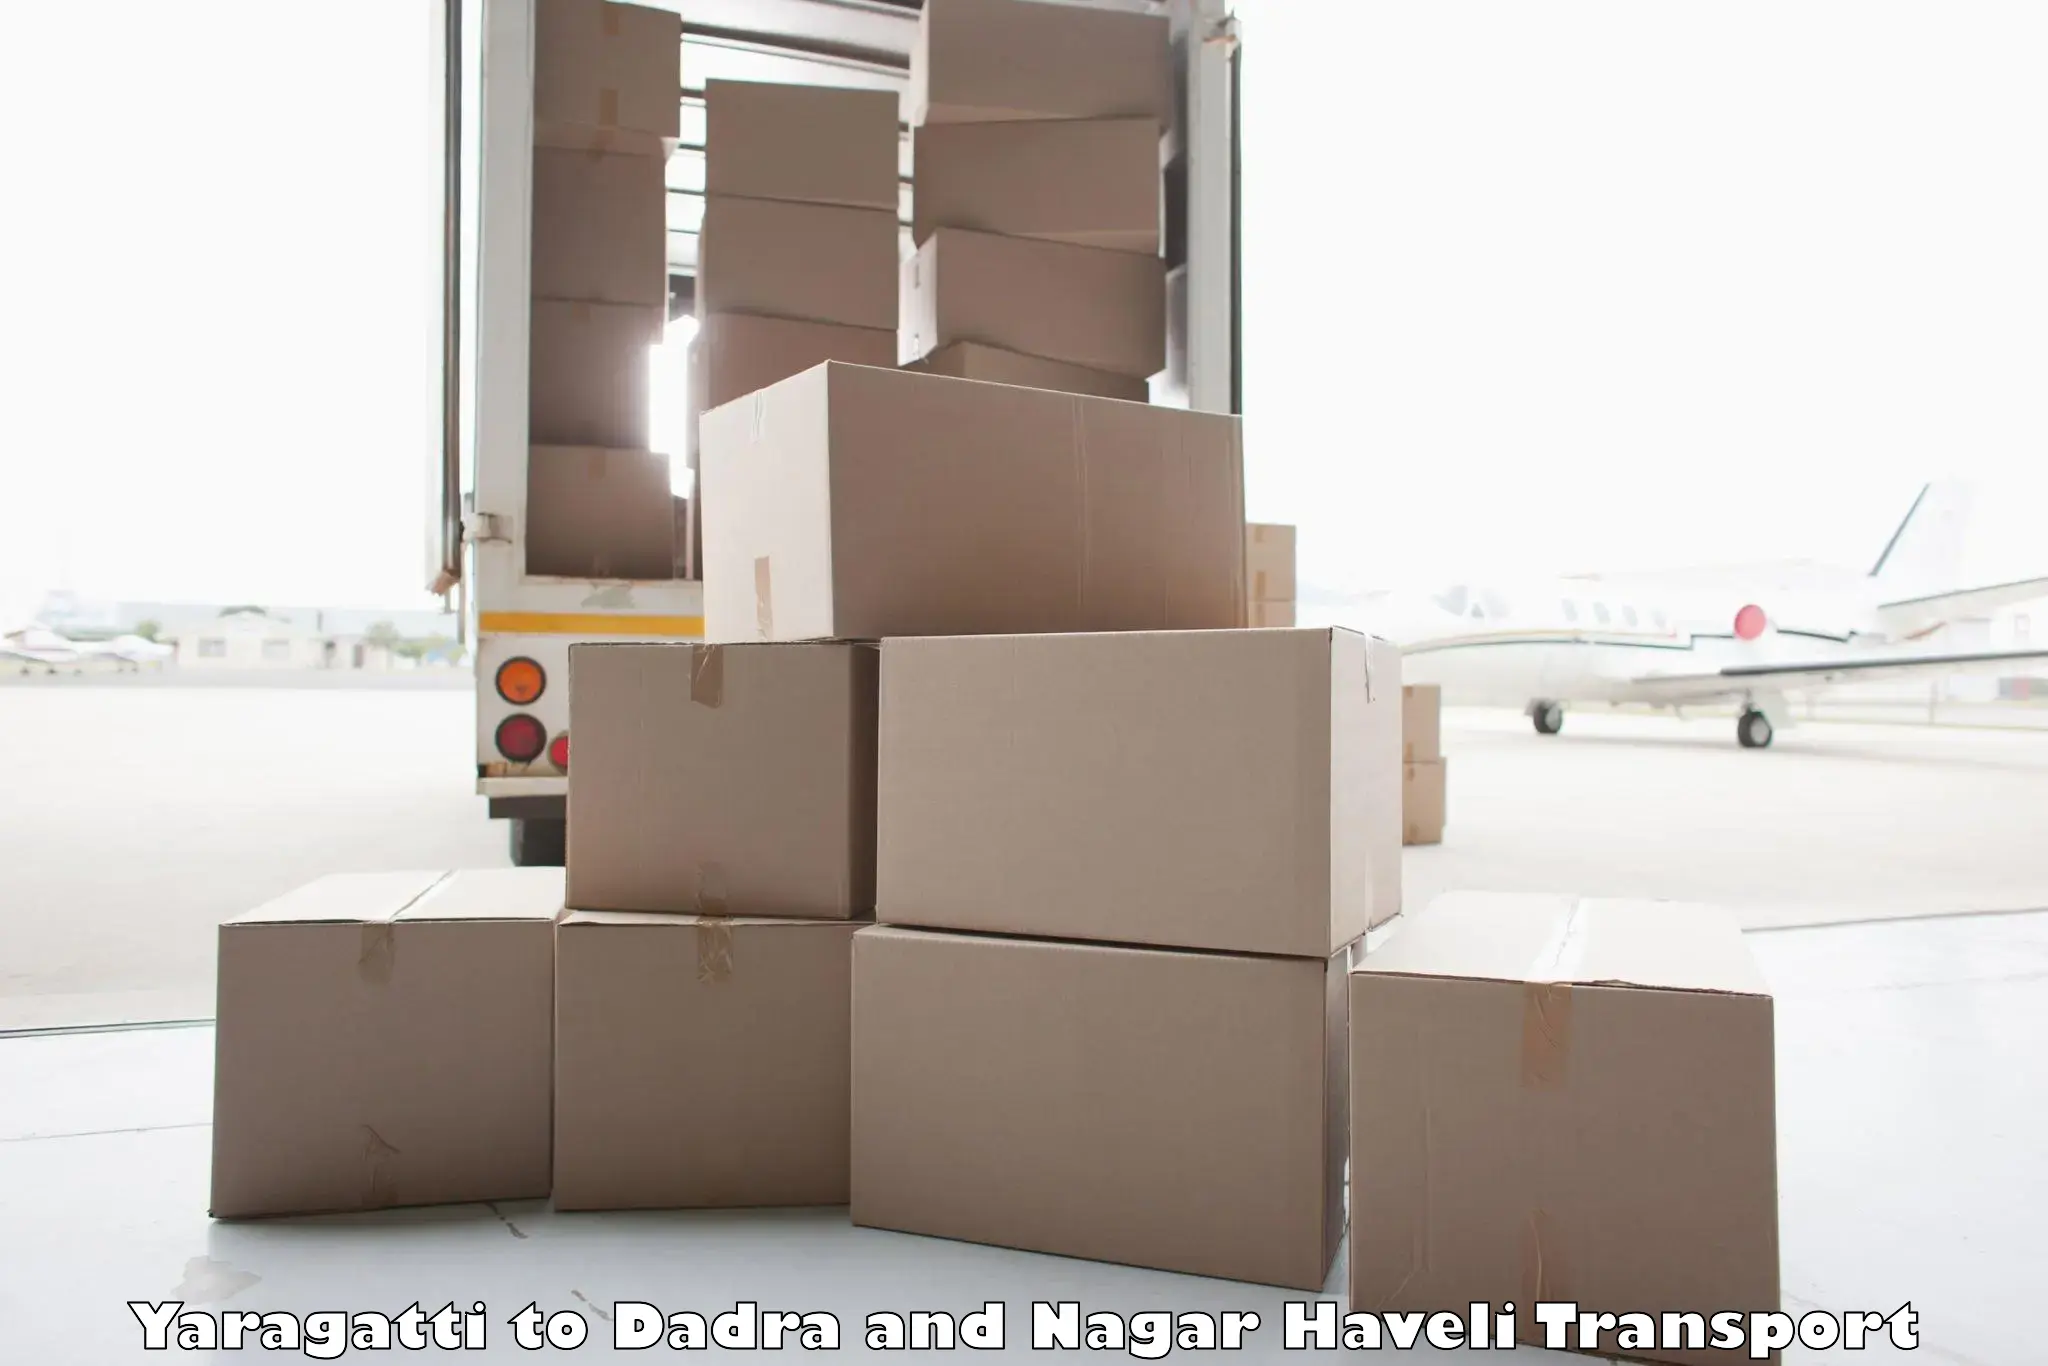 Container transportation services in Yaragatti to Dadra and Nagar Haveli